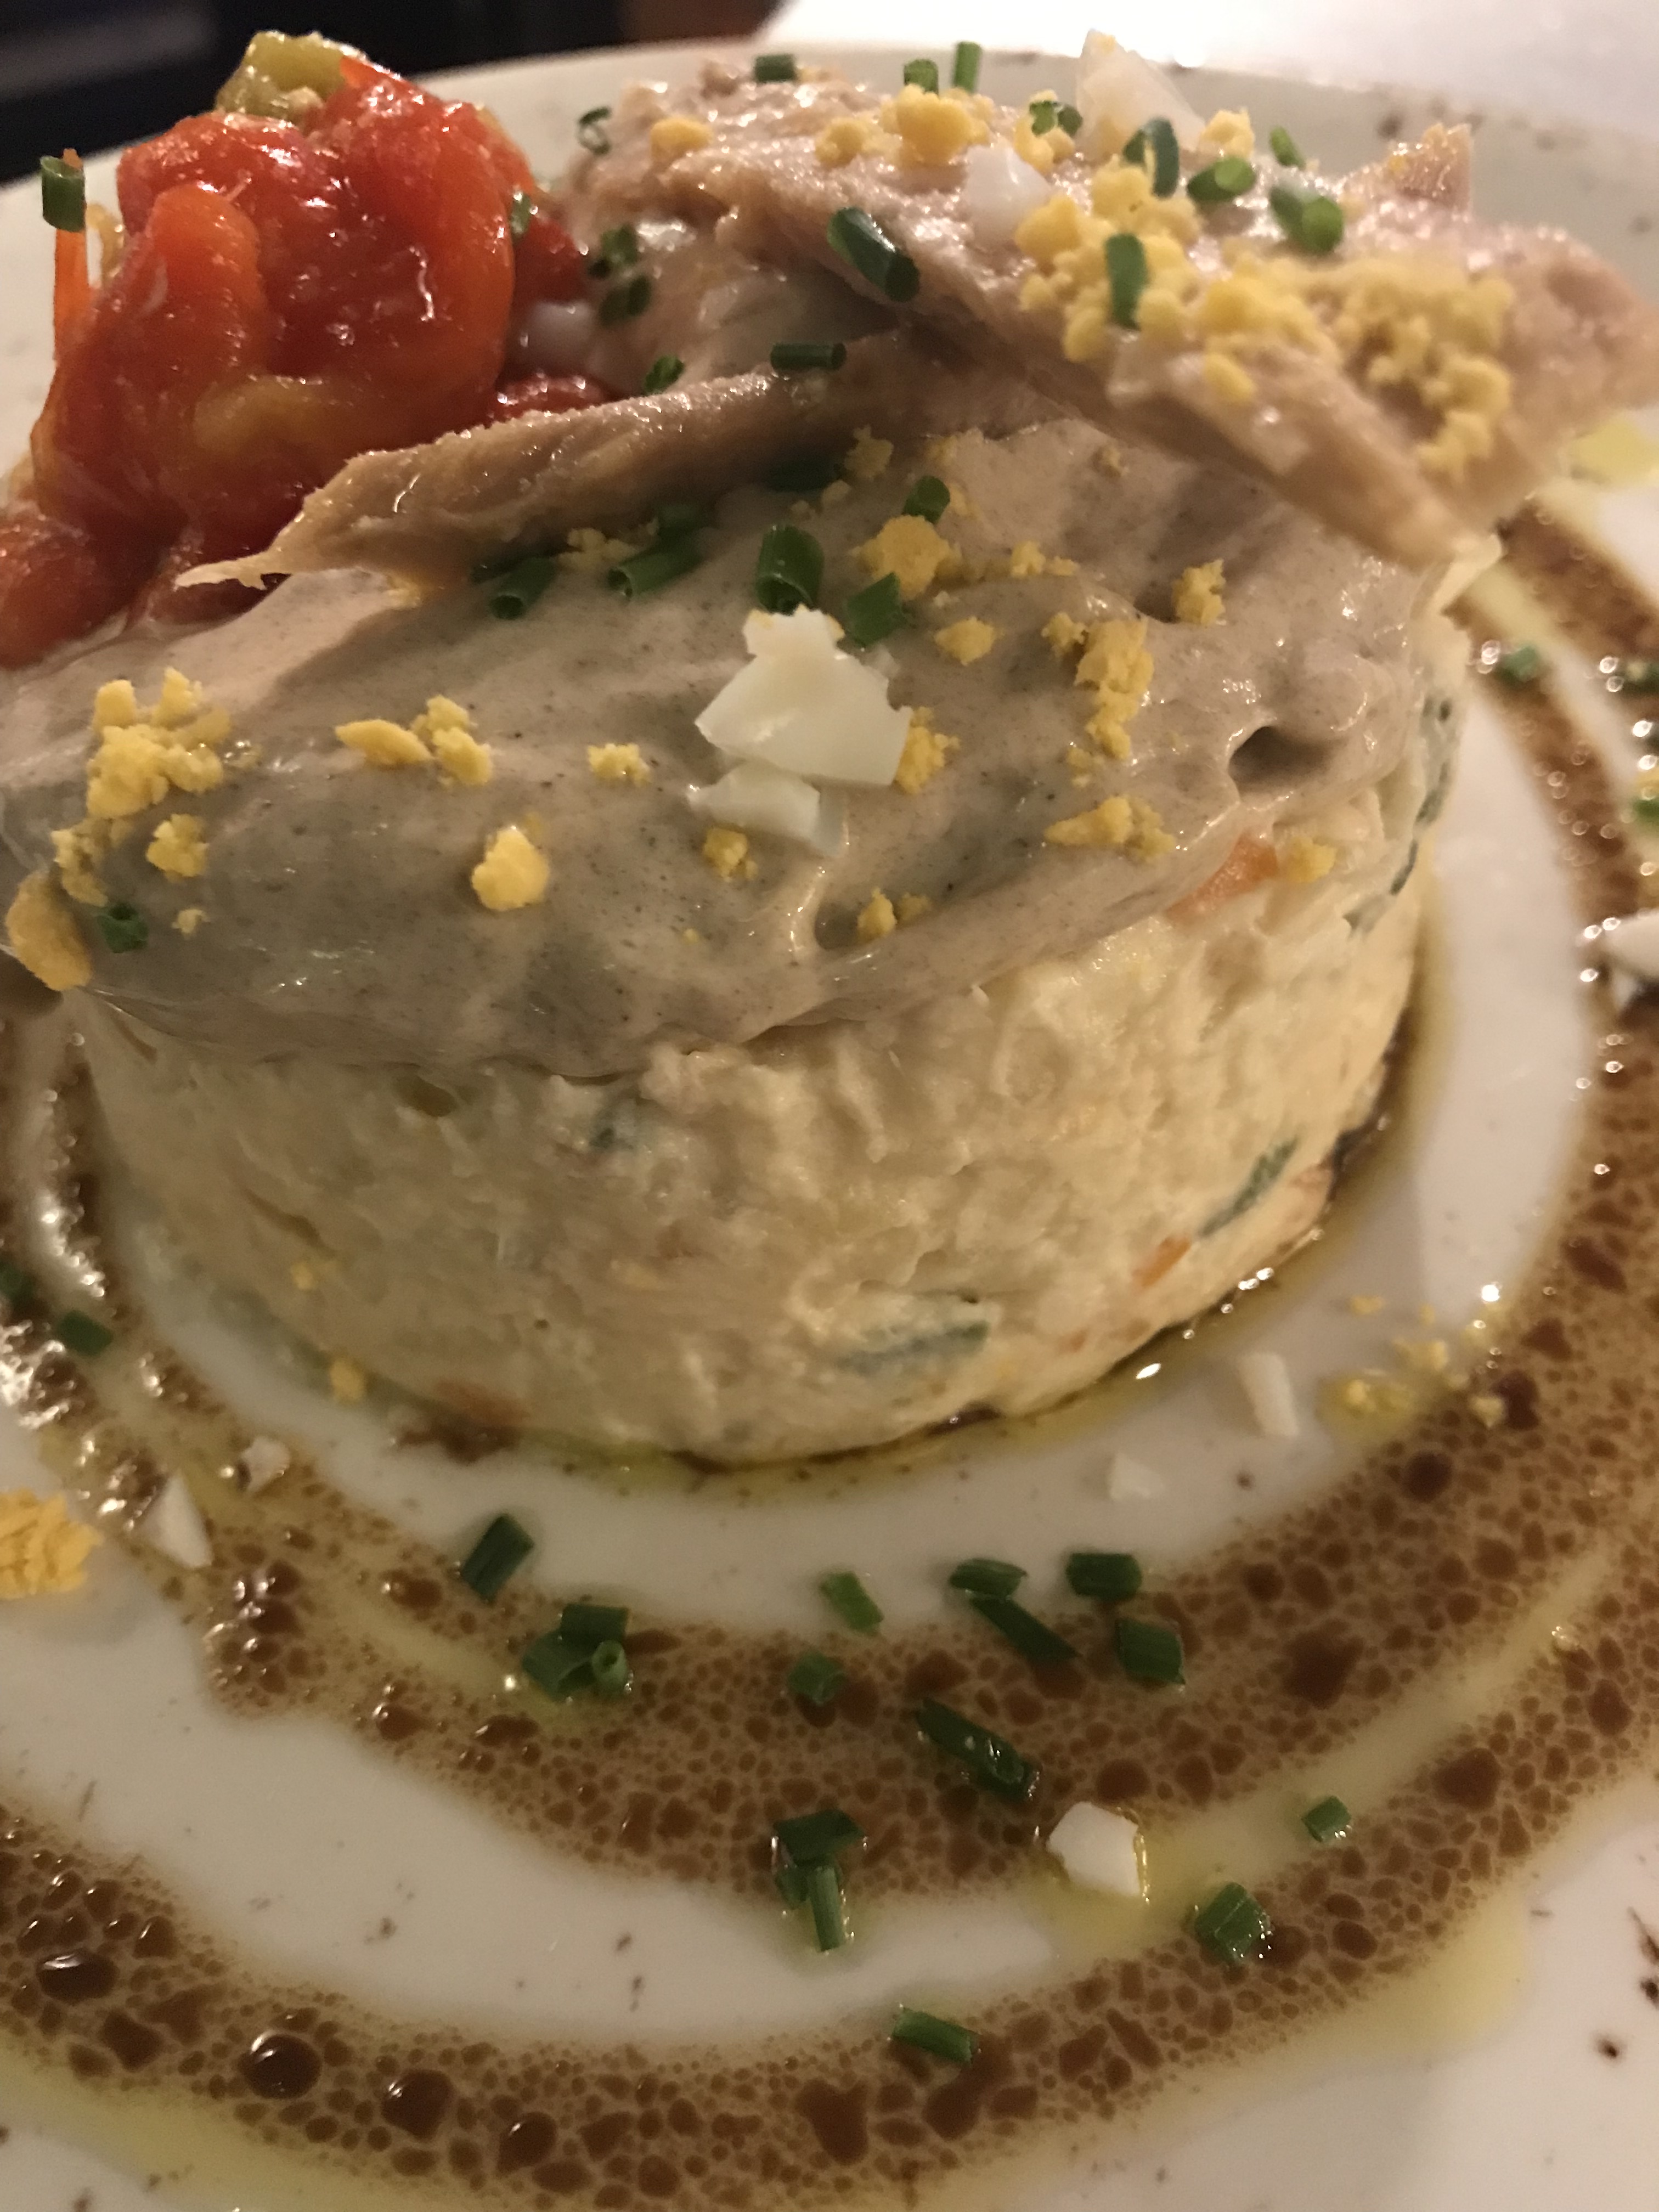 Creamy Russian salad with ventresca mayonnaise